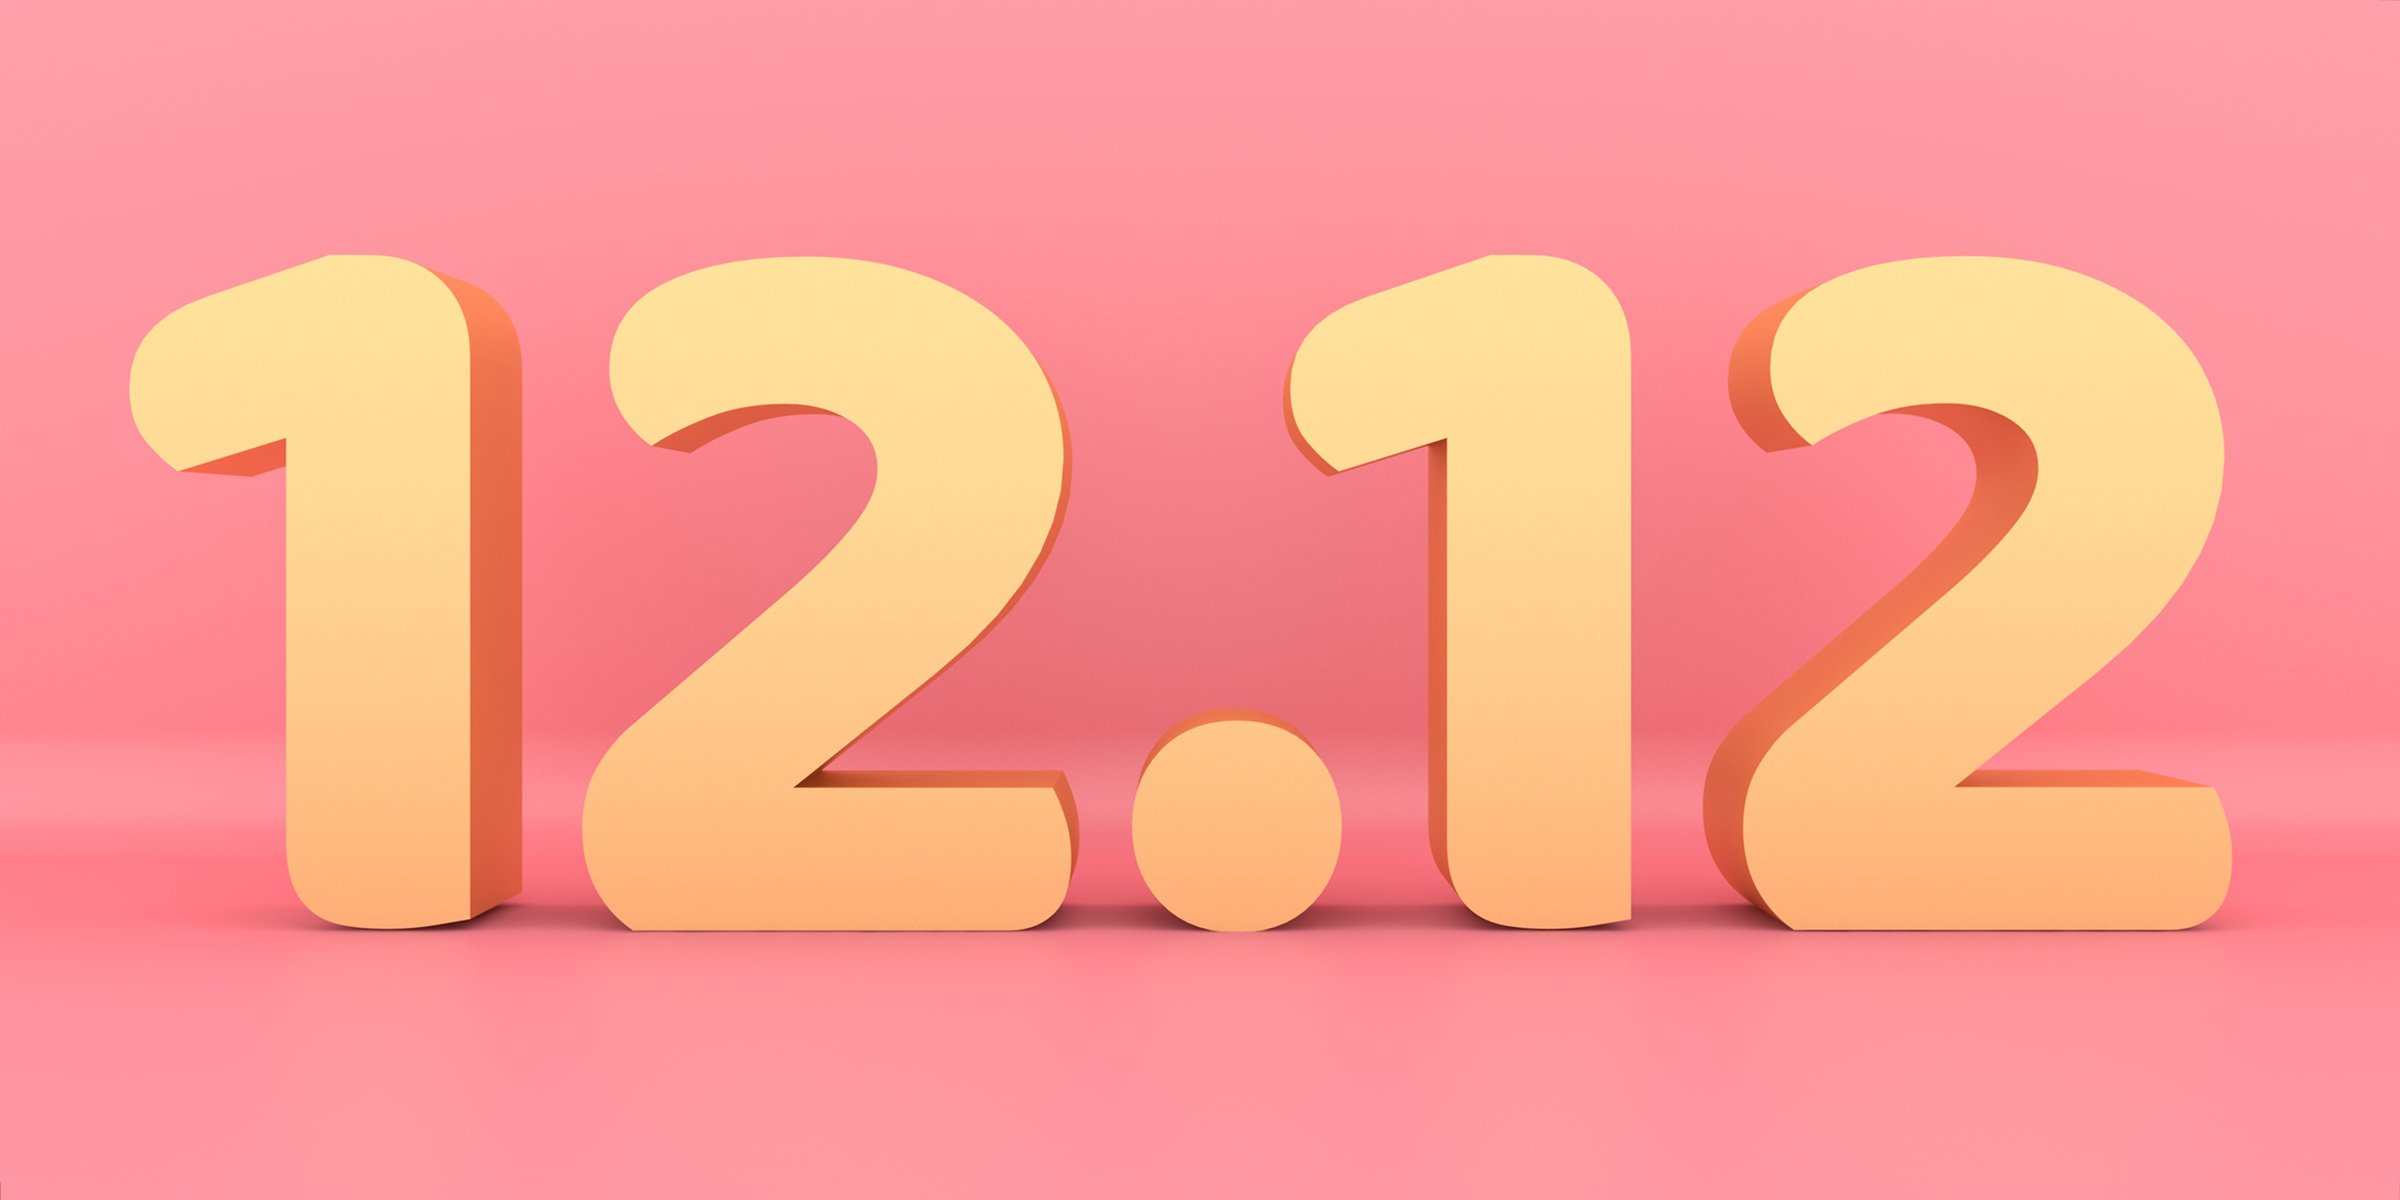 Angel Number 1212 in Bold 3D Font | Source: Shutterstock 